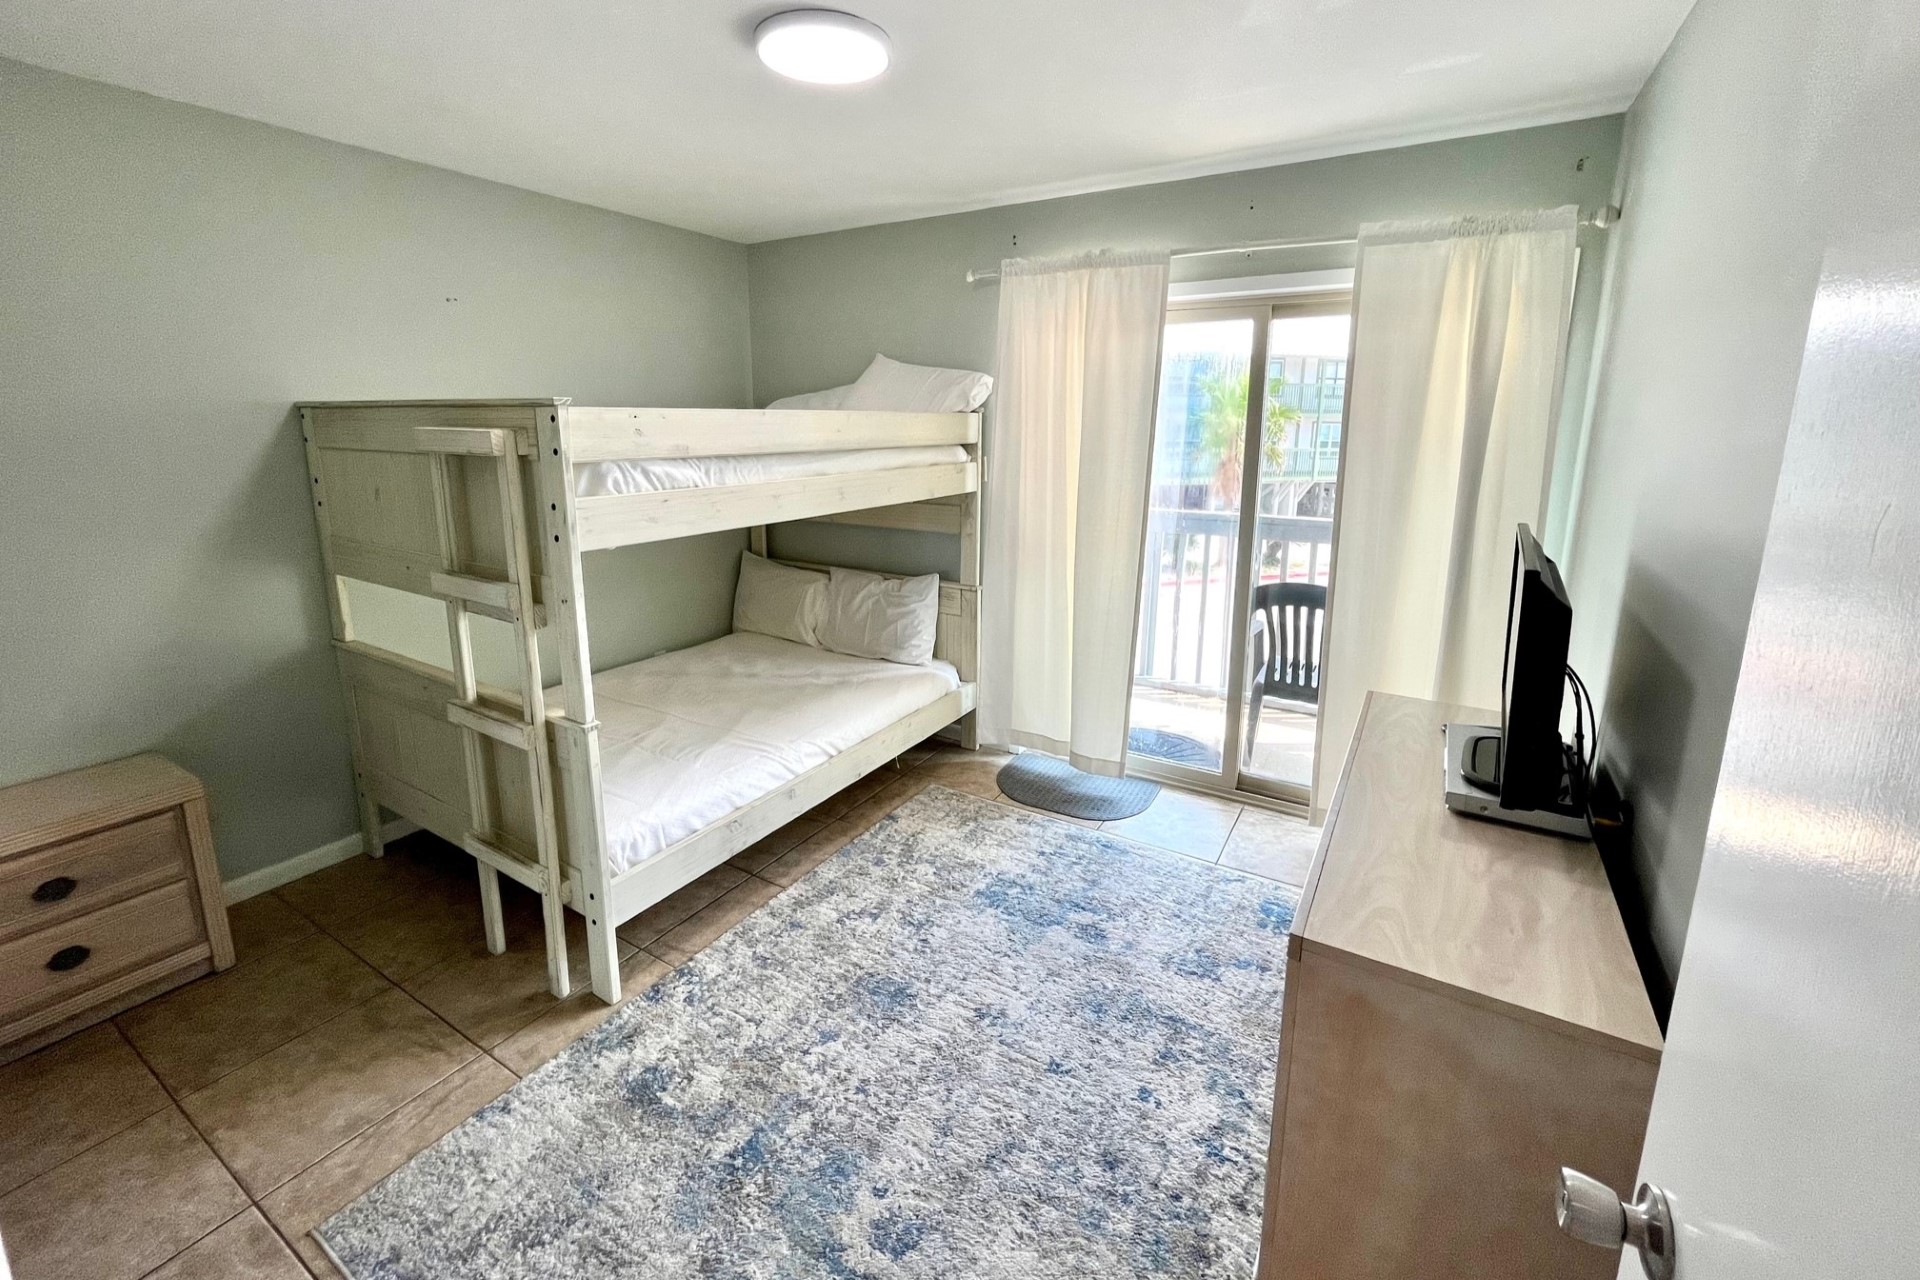 The second bedroom includes 2 twin-size beds, a 22